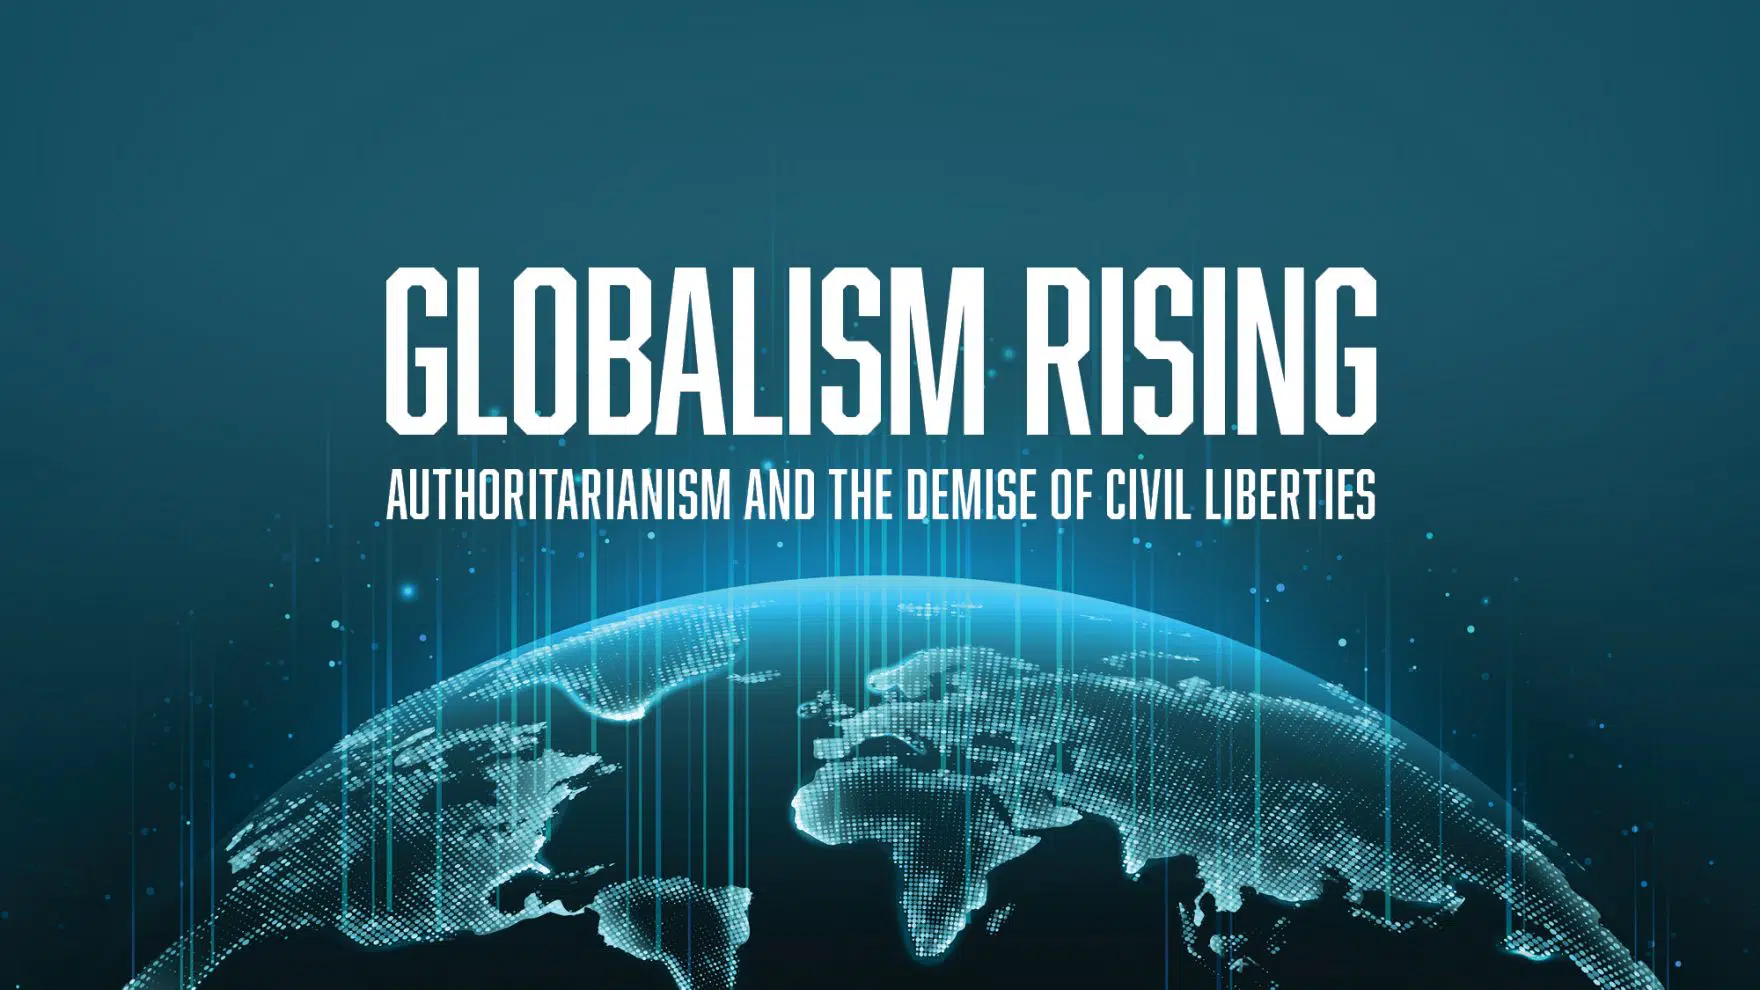 The Rise of Global Government: Leo Hohmann and Dr. Michael Rectenwald